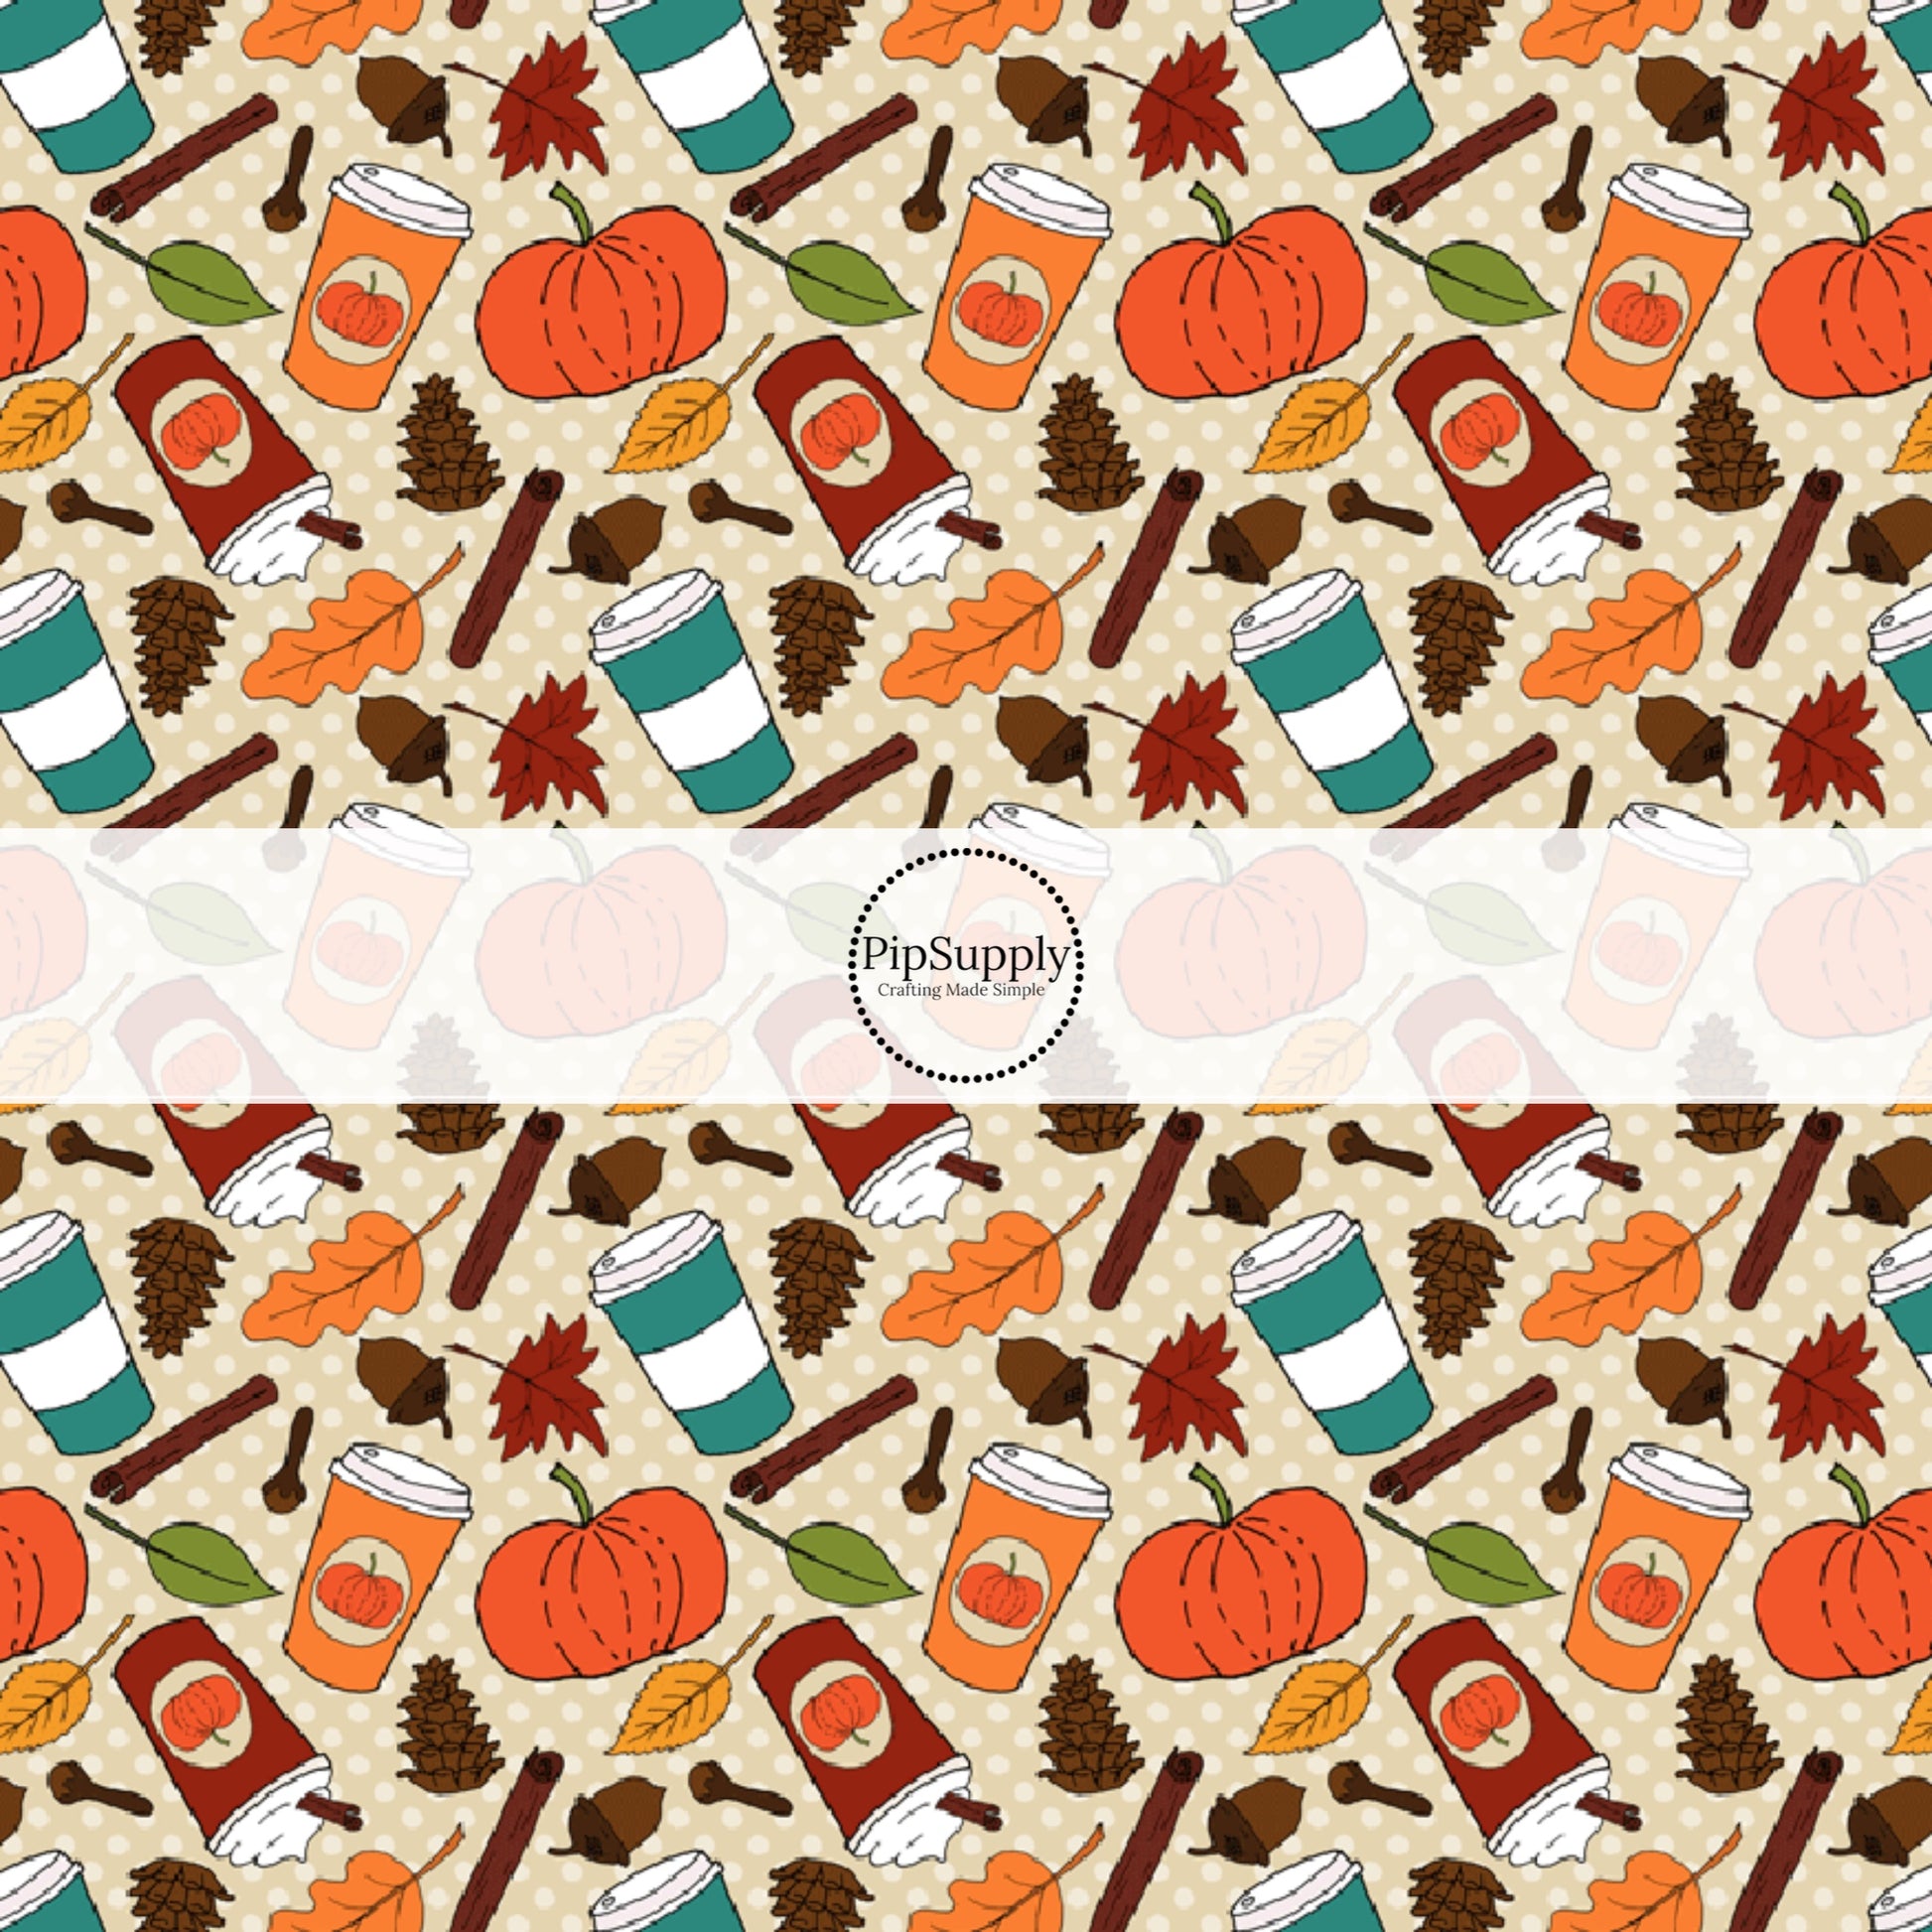 These fall pumpkin themed cream headband kits are easy to assemble and come with everything you need to make your own knotted headband. These fun fall kits include a custom printed and sewn fabric strip and a coordinating velvet headband. The headband kits features pumpkin spice cups surrounded by pumpkins and leaves. 